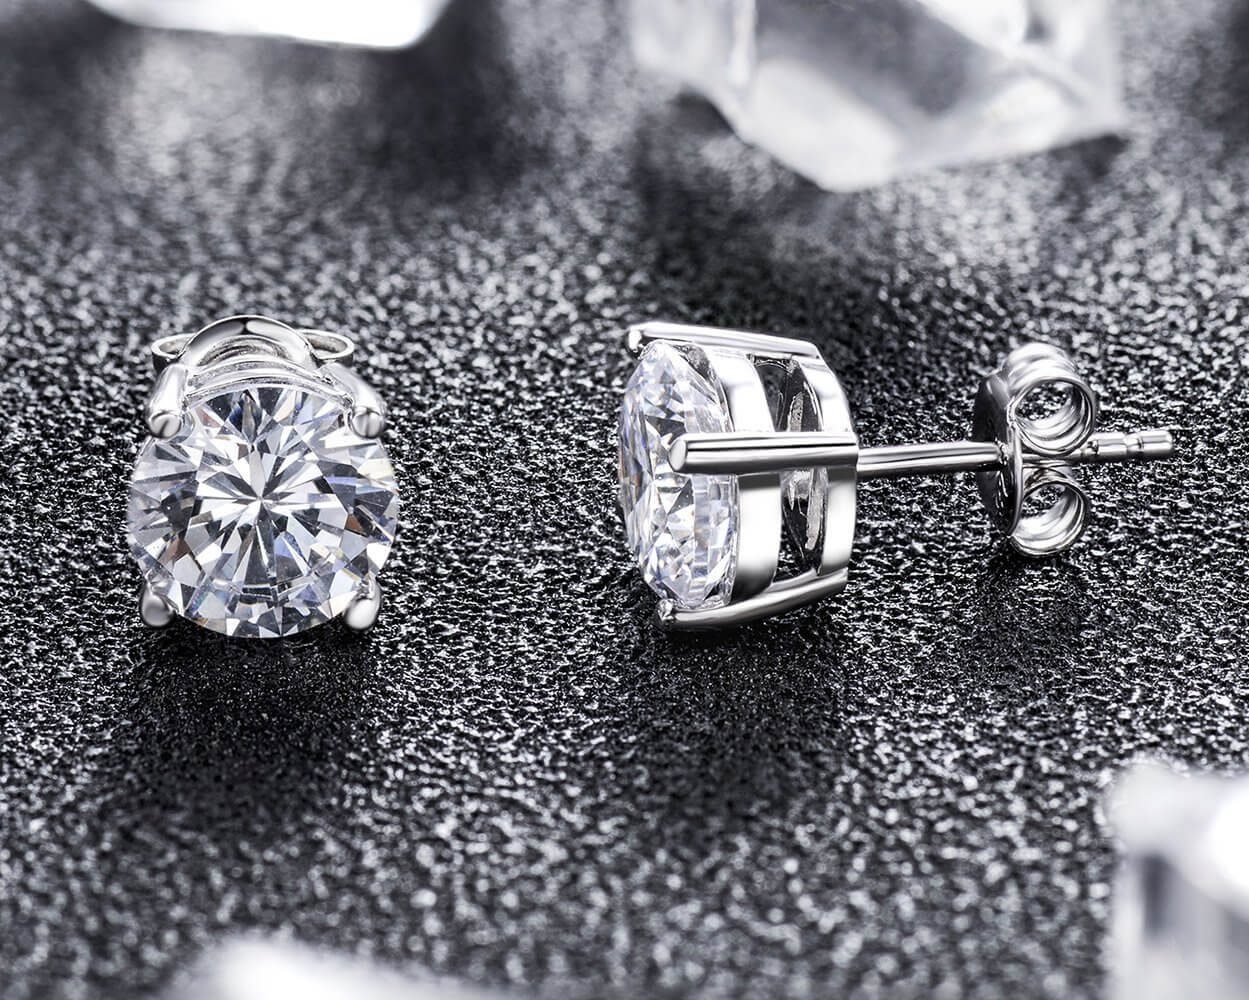 How To Tell if a Diamond Earring is Real